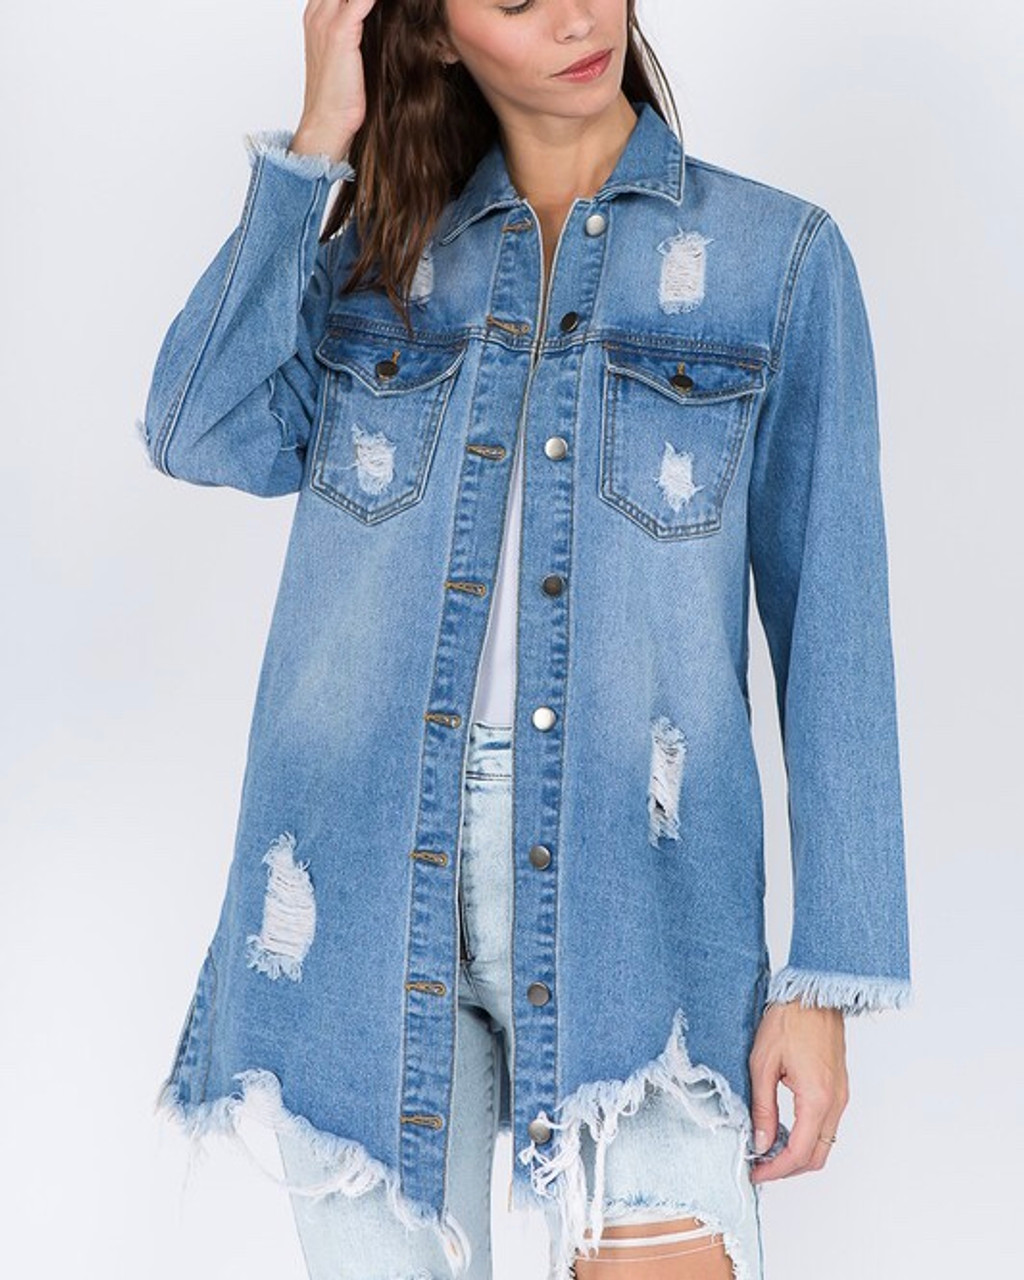 Buy Arshia Fashions Girls Dress Top and Jeans with Denim Jacket -Full  Sleeves - Party wear Online @ ₹999 from ShopClues